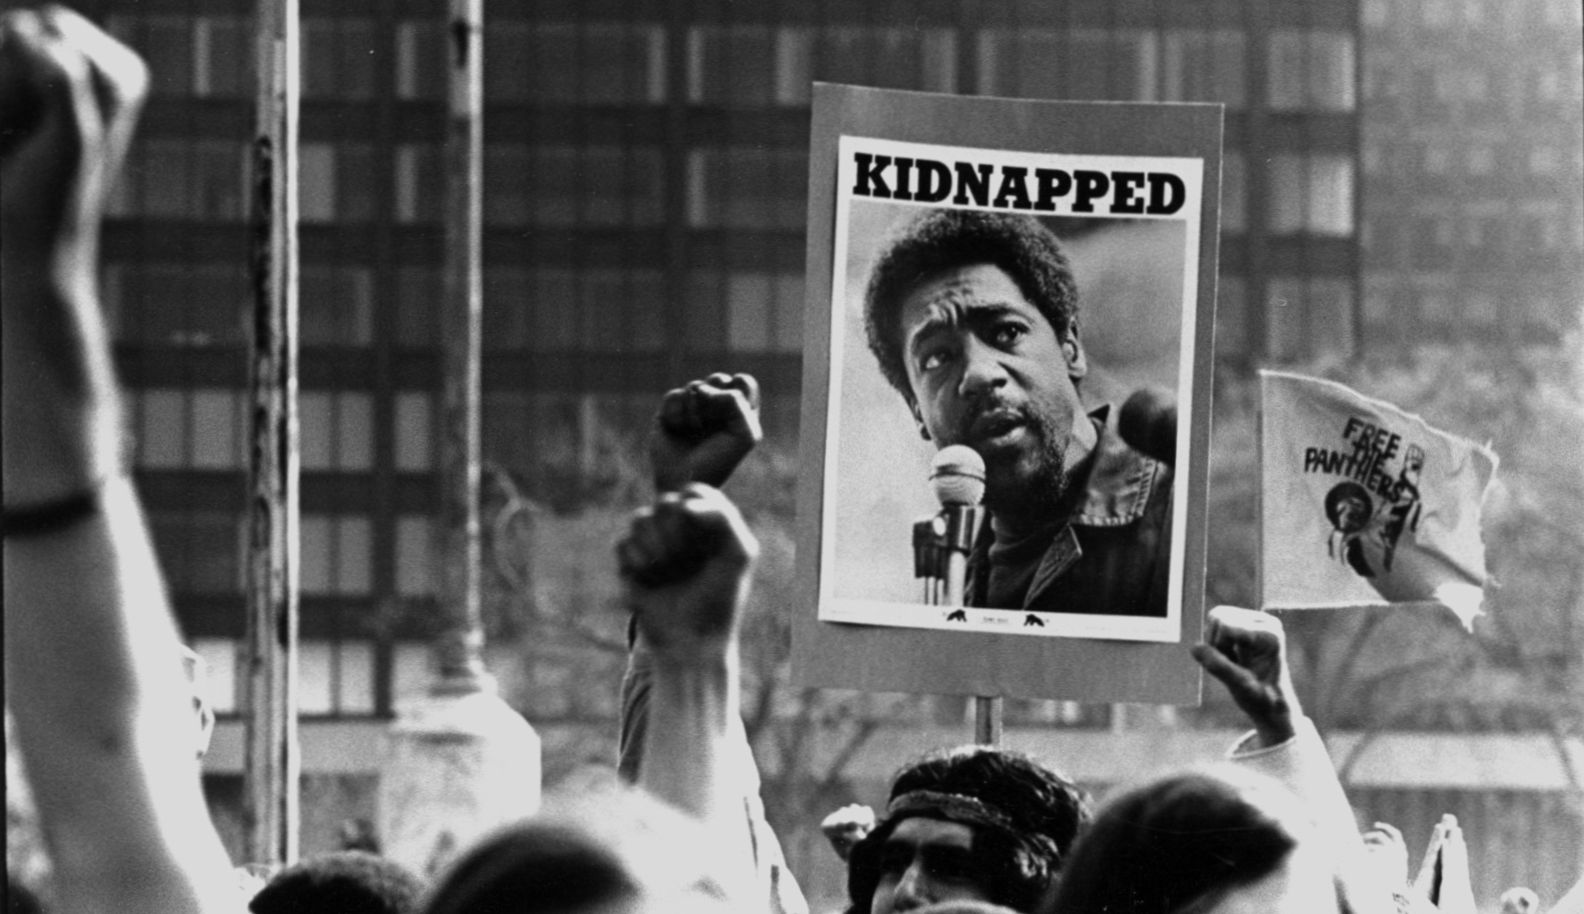 Protesters the New Haven Green demonstrate against the trial of Black Panther co-founder Bobby Seale. Photo by Stephen West, Yale University Library.